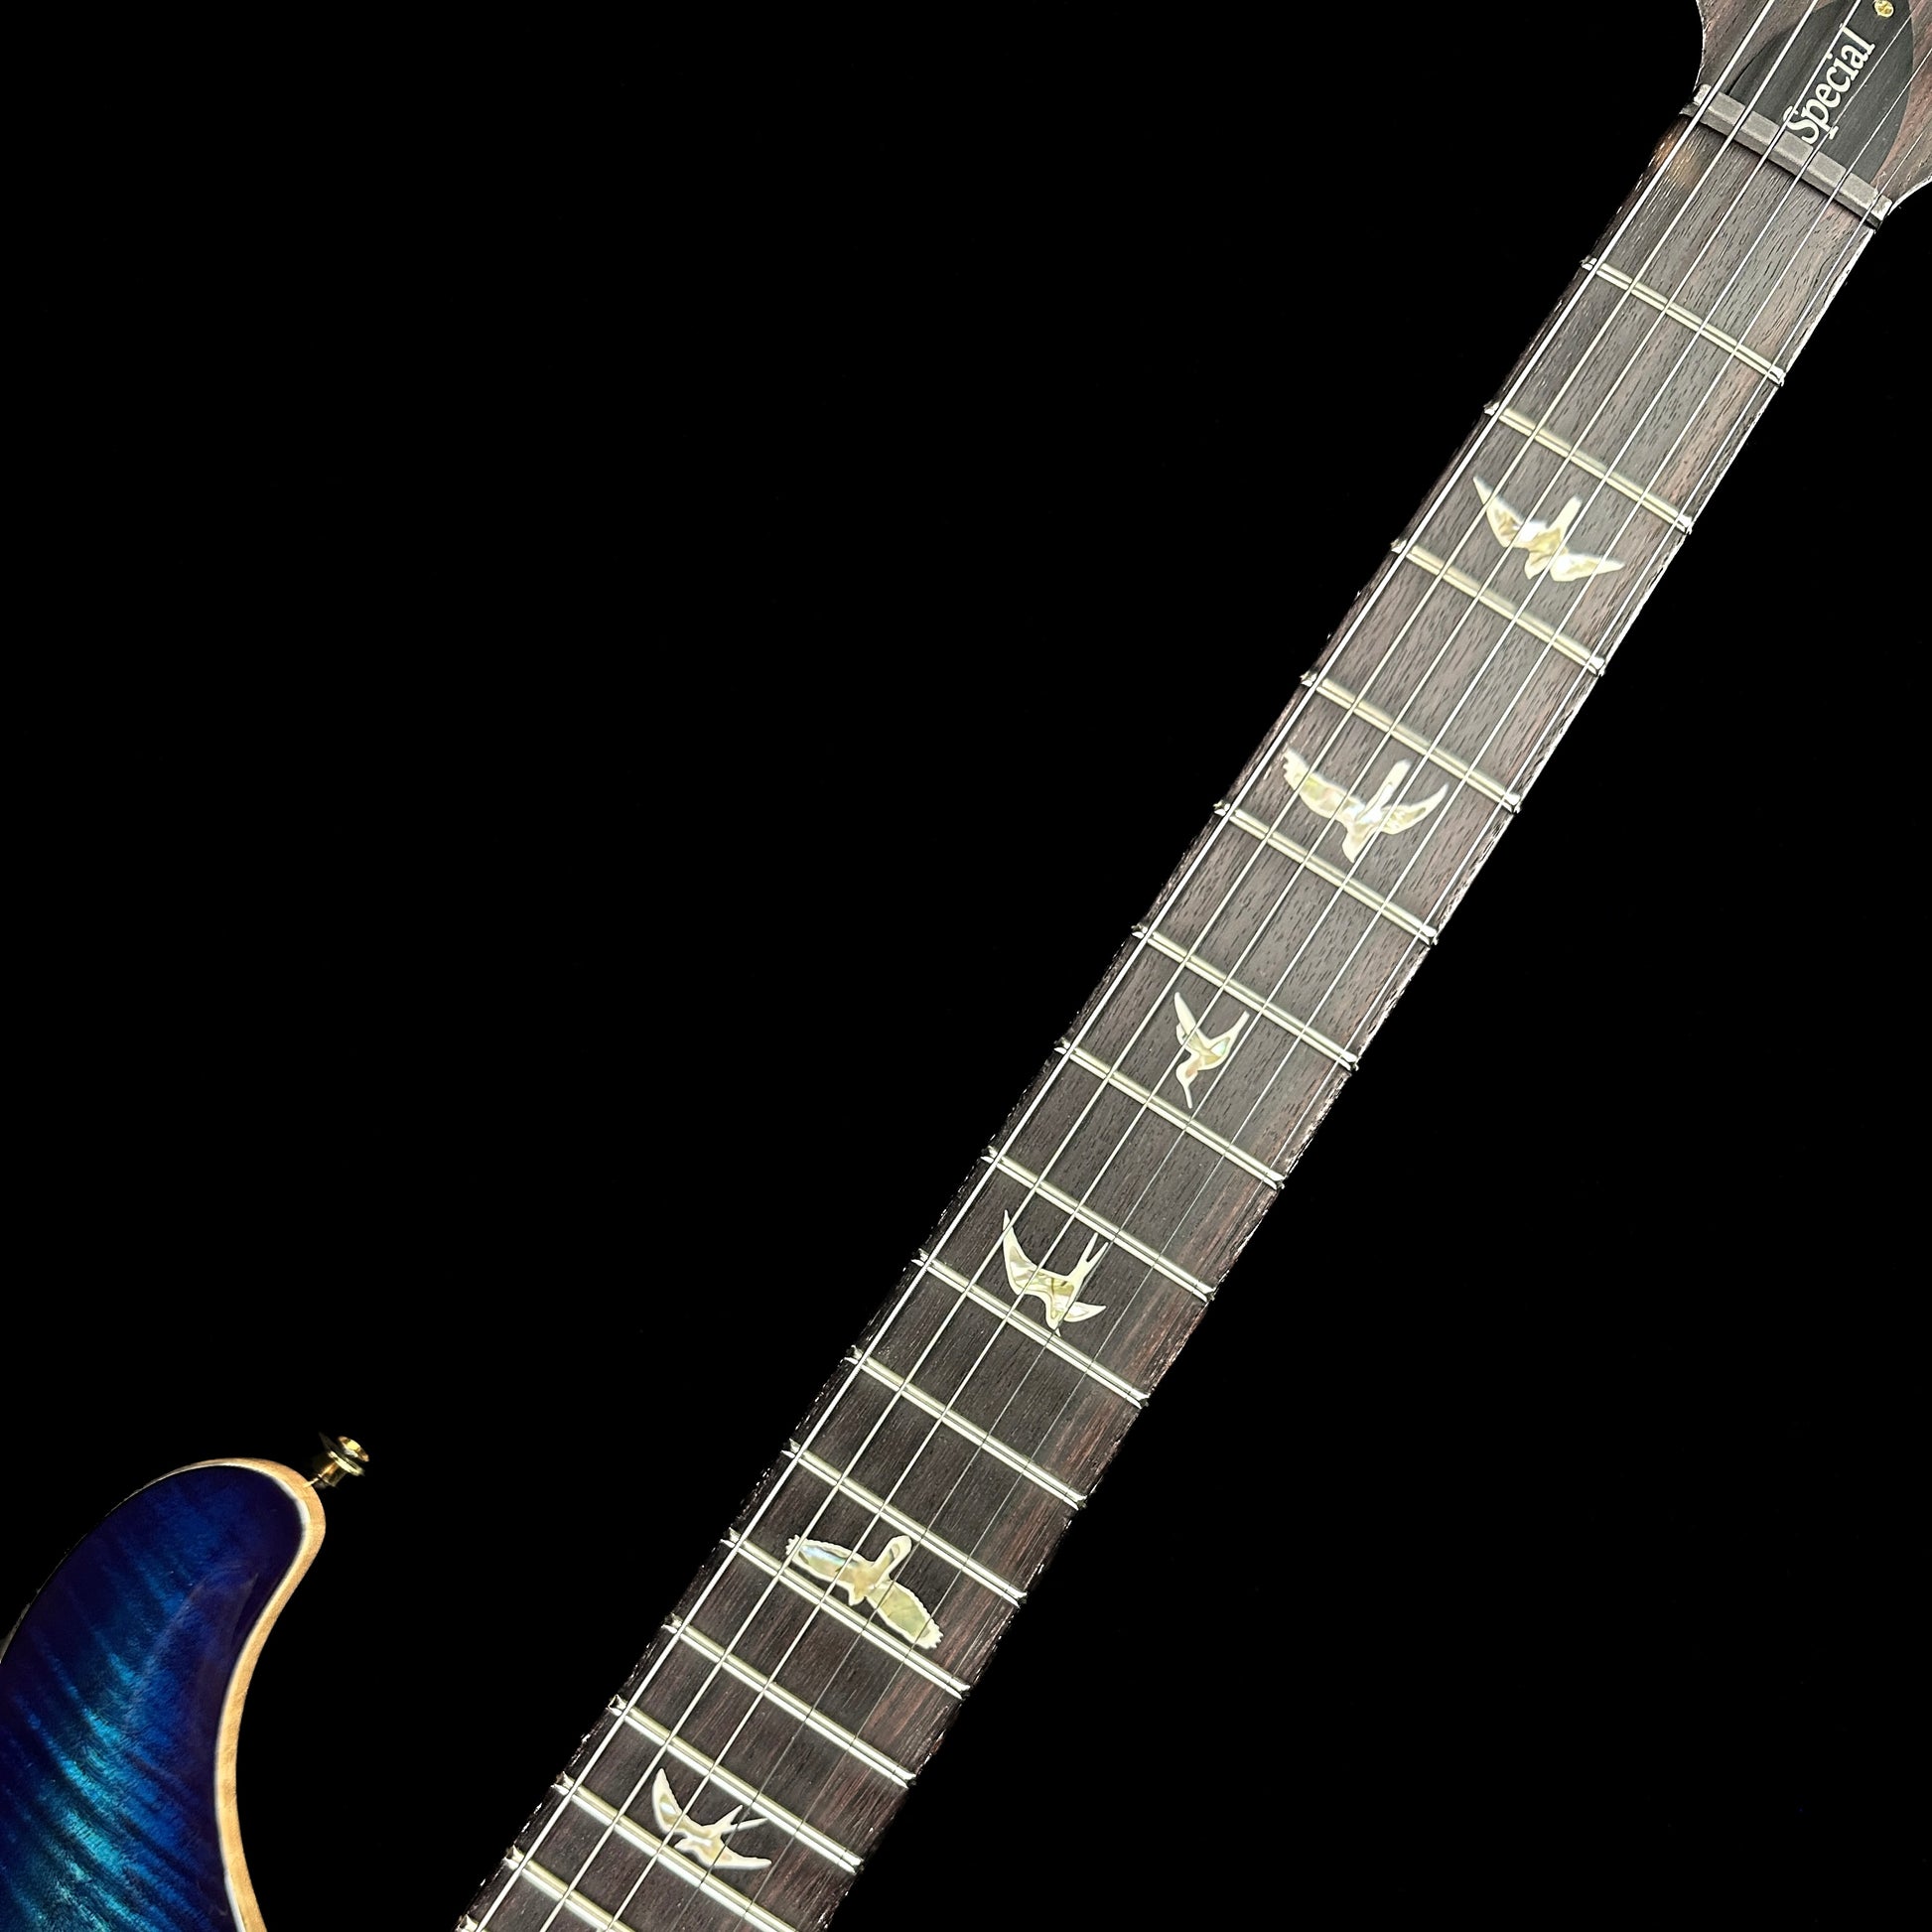 Fretboard of PRS Paul Reed Smith Special Semi-Hollow Cobalt Blue 10 Top.